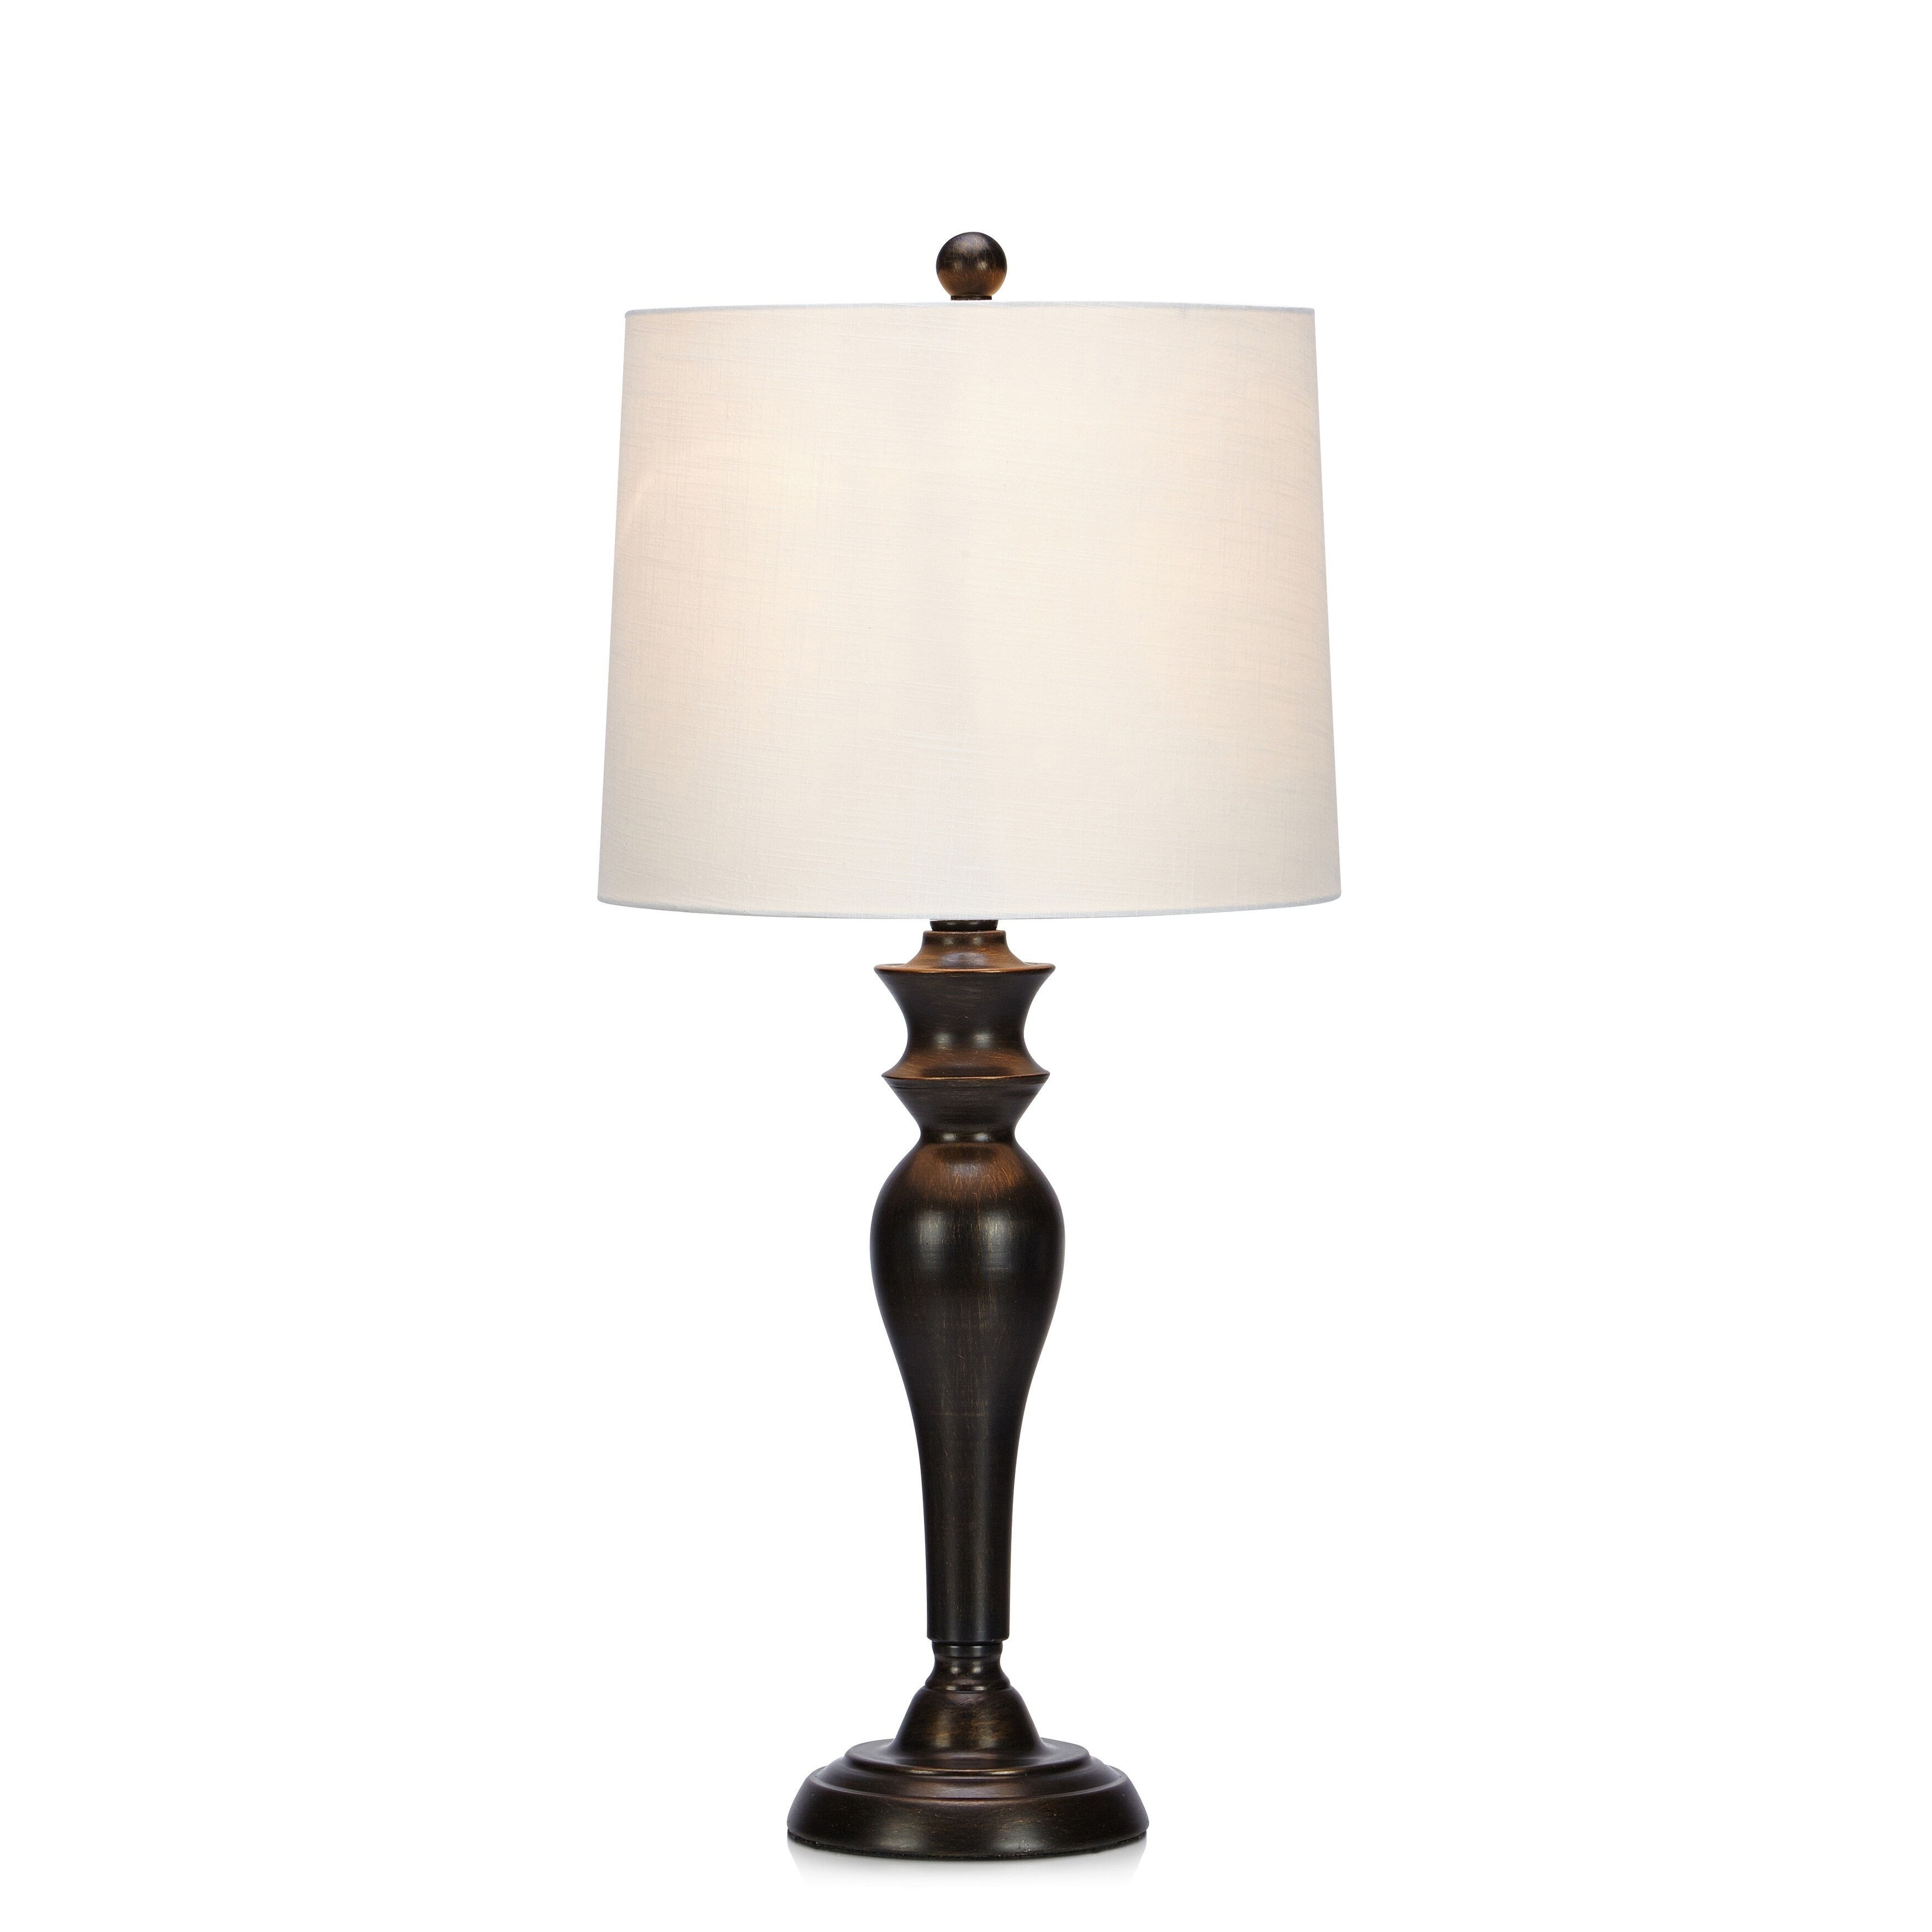 Traditional Side Table Lamp In Black With Golden Accents Overstock 21811058